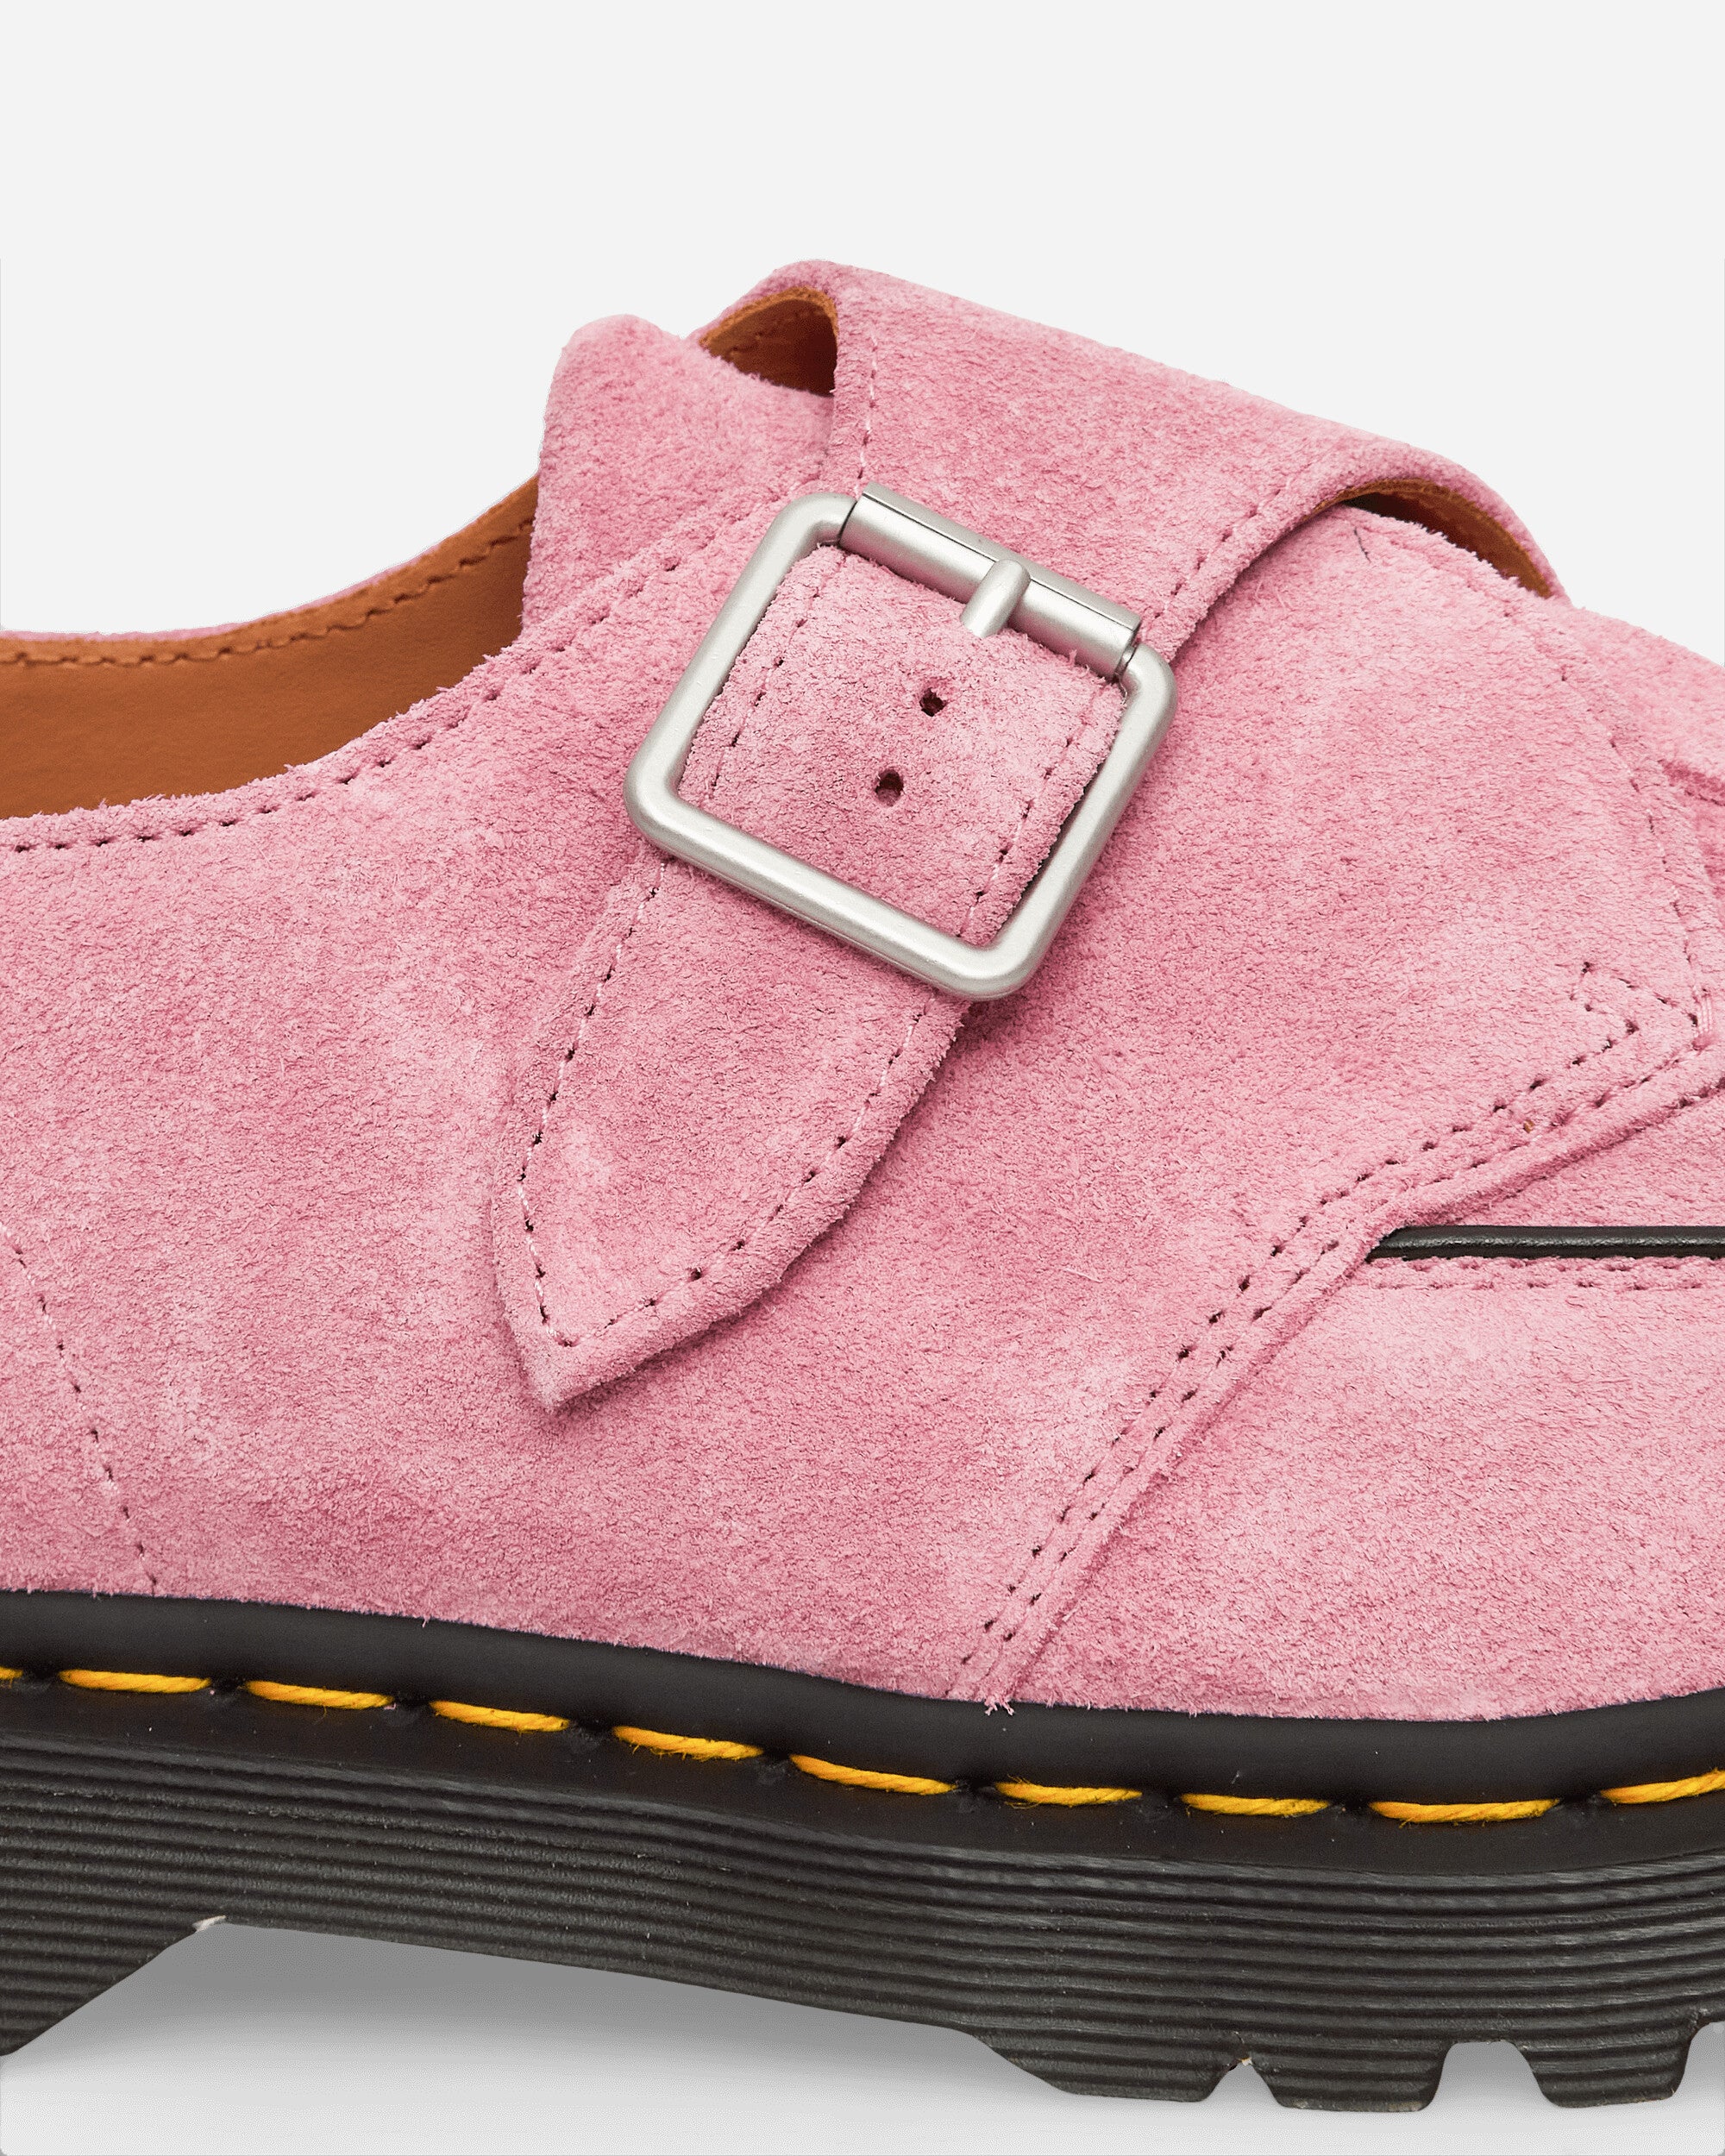 Dr. Martens Ramsey Monk Klt Pink Classic Shoes Loafers 31501446 PINK